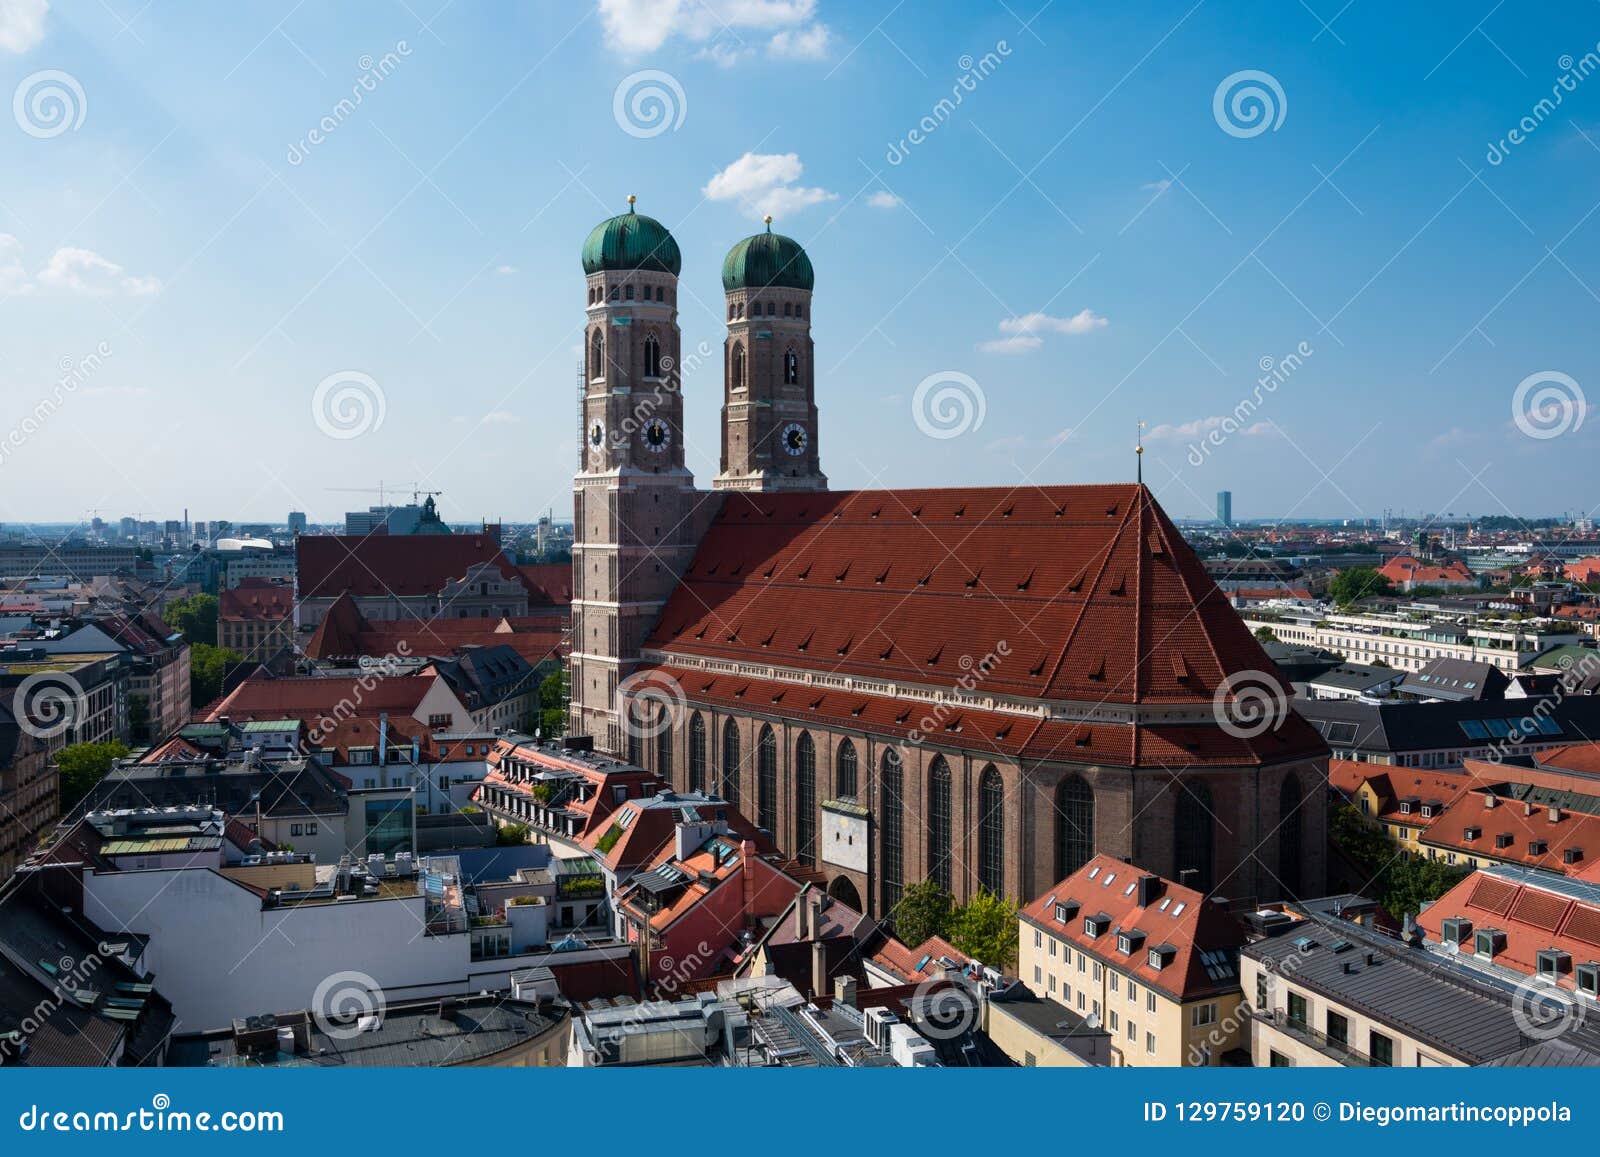 view of munich city and frauenkirche munich cathedral